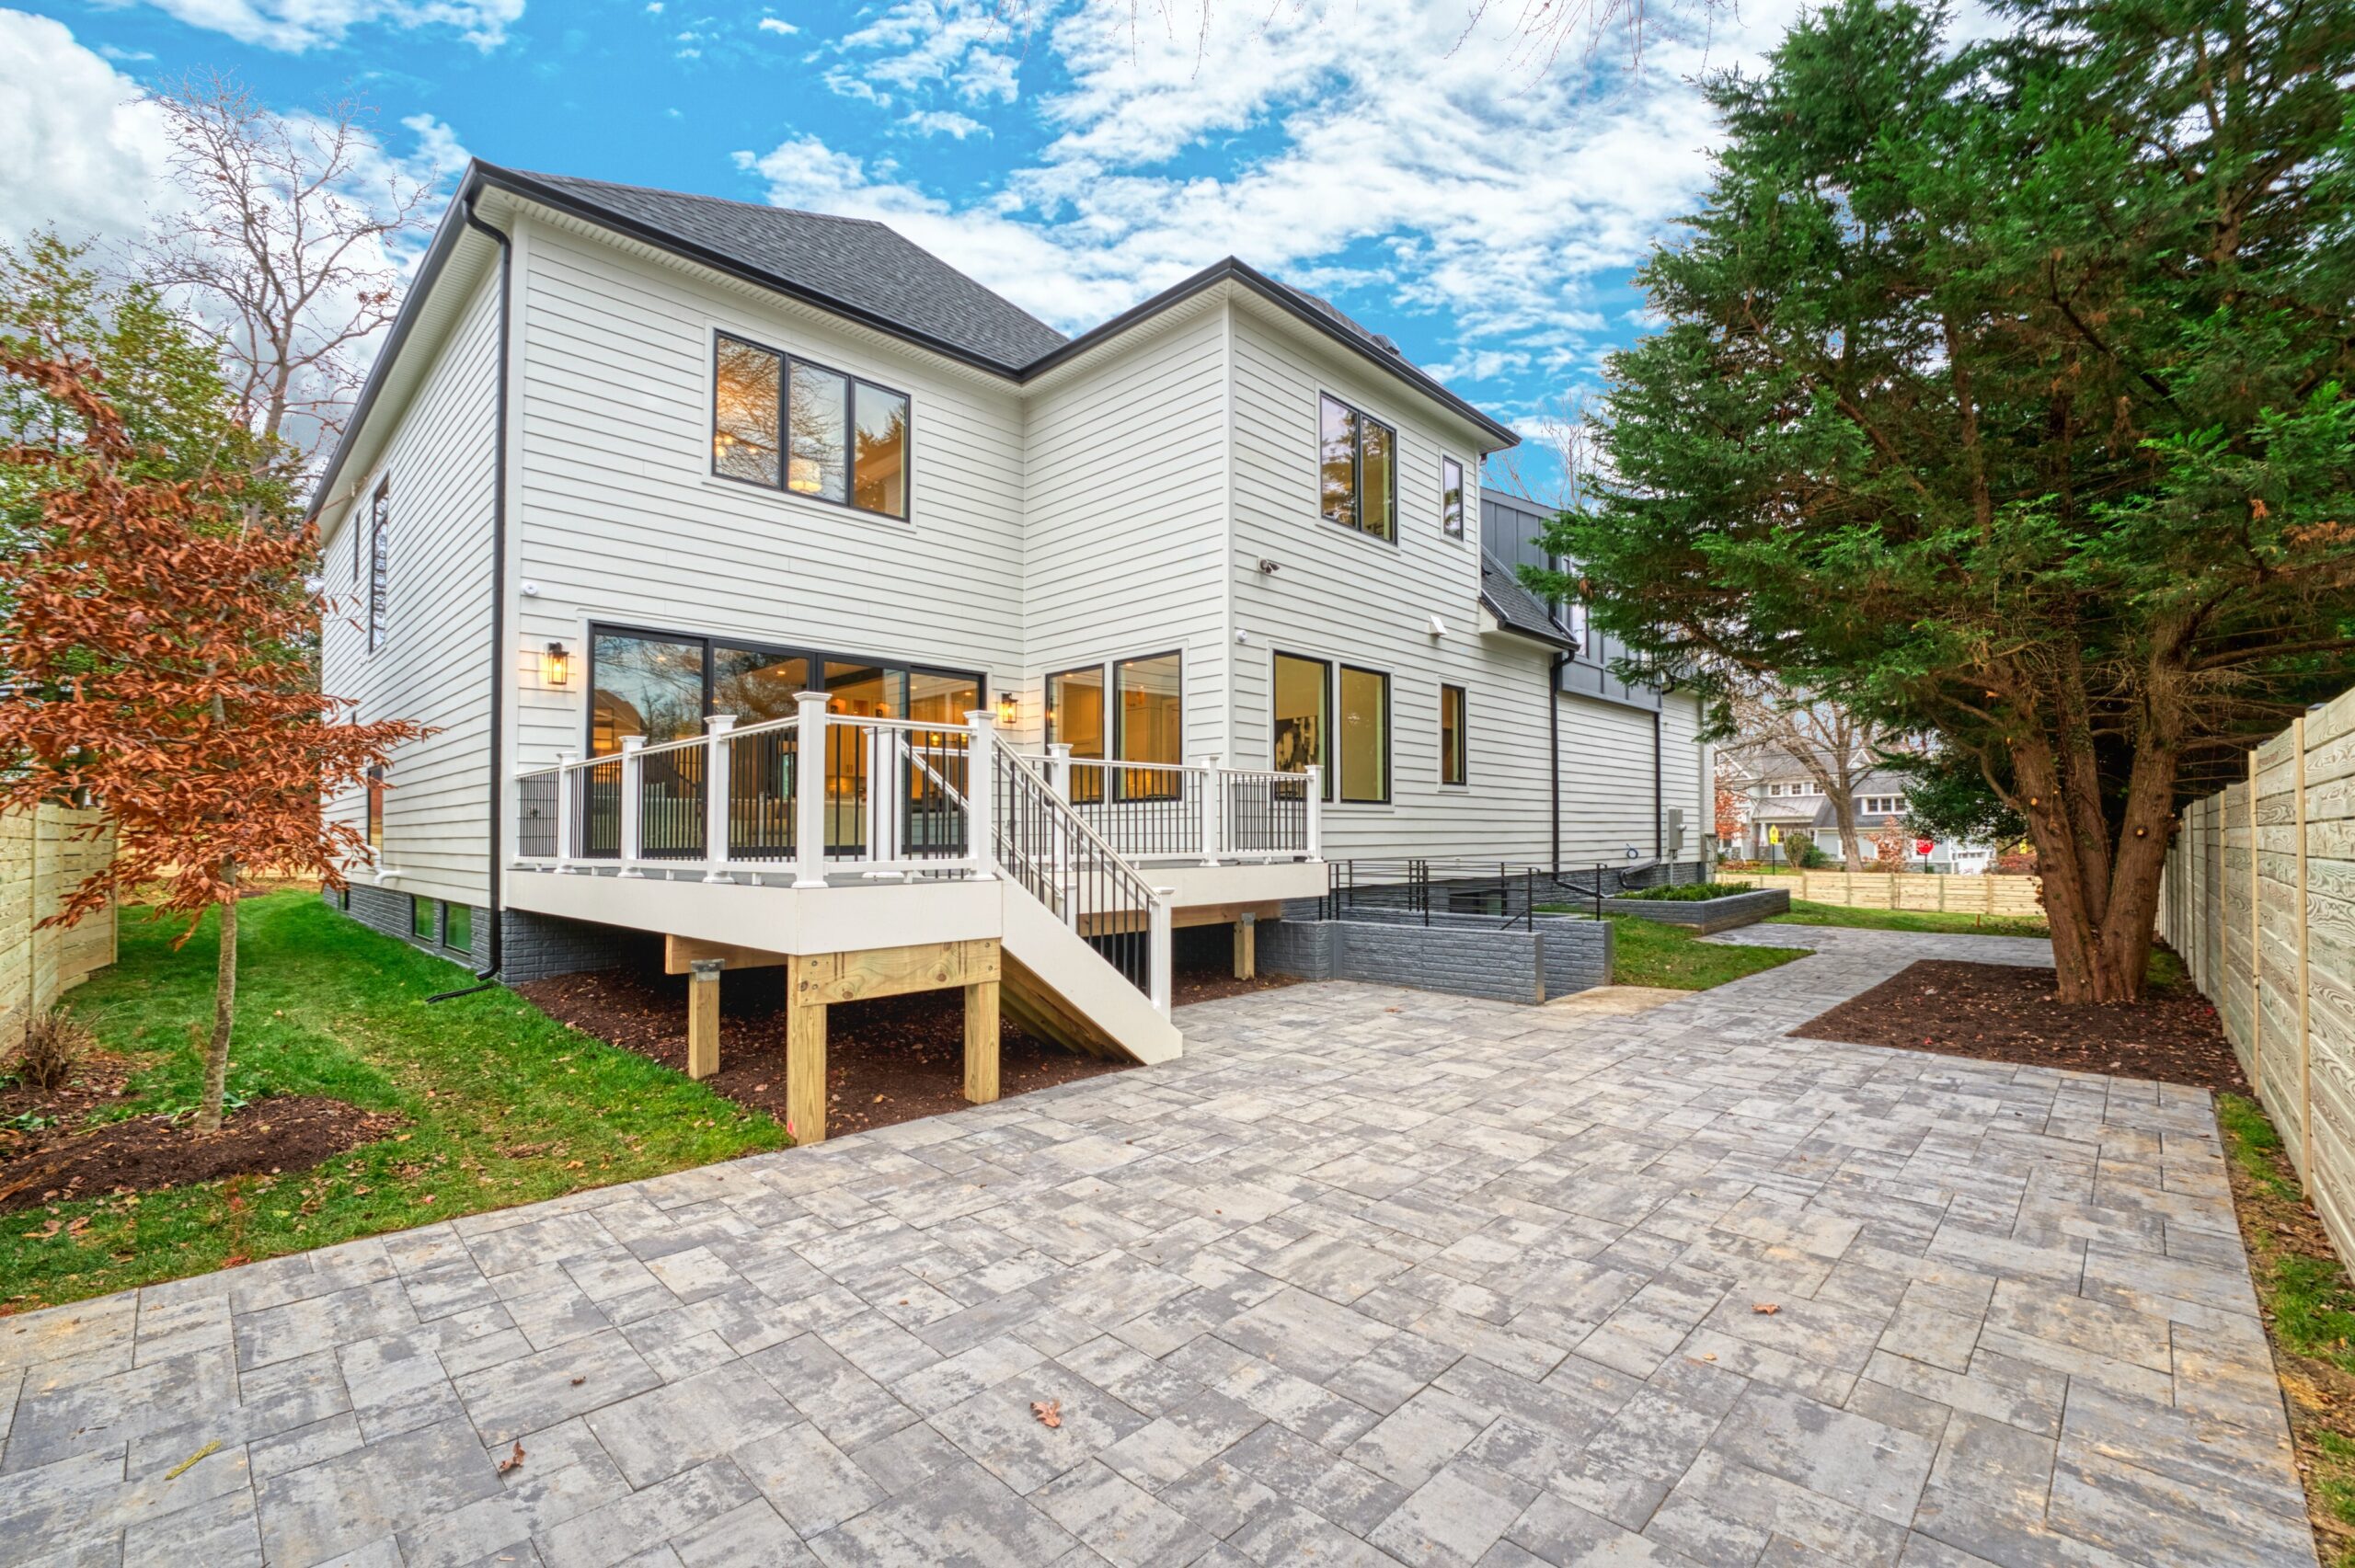 Professional exterior photo of 3400 N Ohio St - showing the rear of the home with large deck over expansive stone patio all within a fully fenced yard
